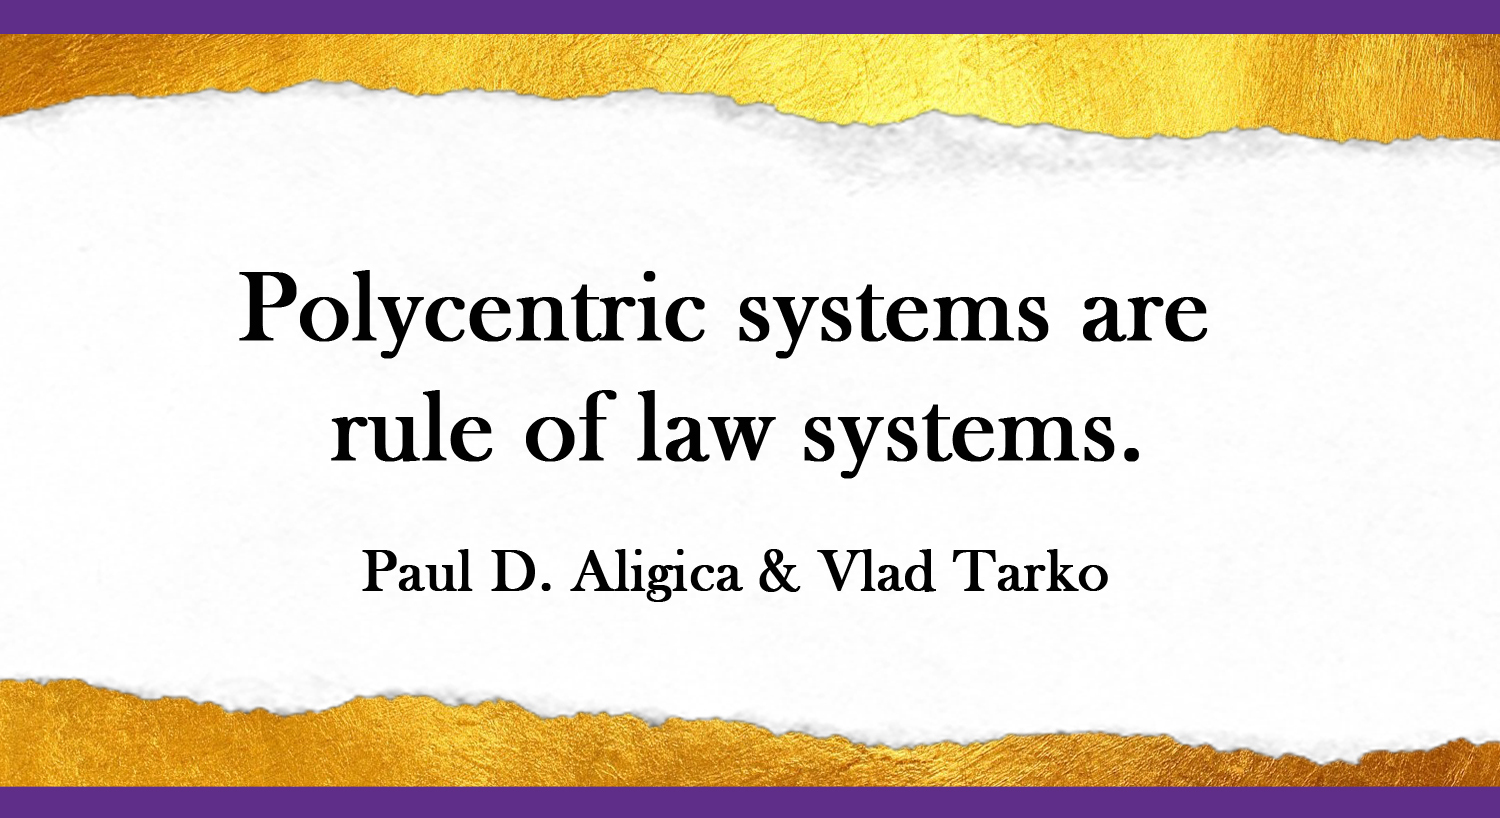 Polycentric Systems are Rule of Law Systems